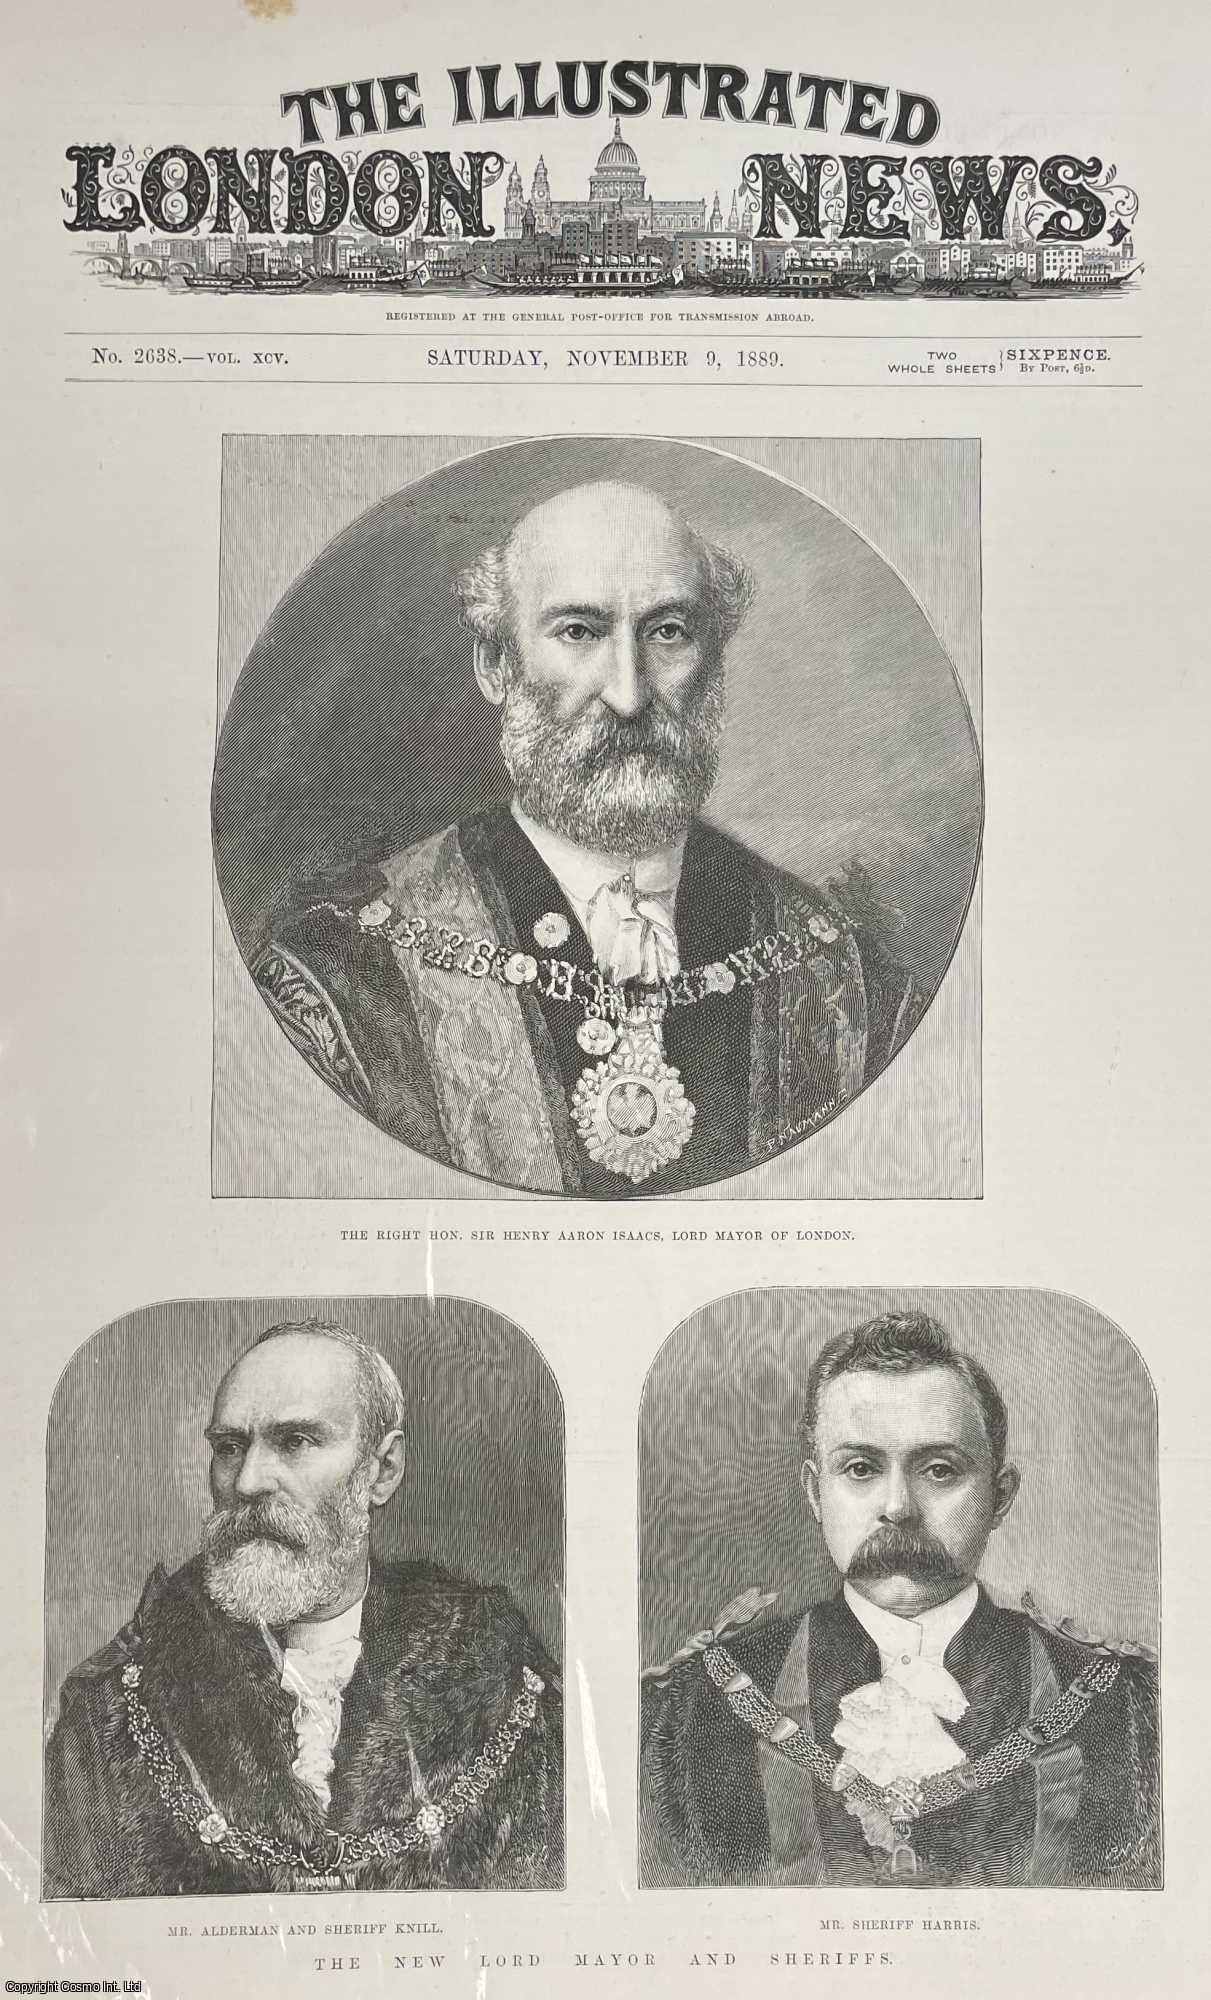 PORTRAIT - The New Lord Mayor and Sherriffs of London; Sir Henry Aaron Isaacs, Mr Knill and Mr Harris. An original print and article from the Illustrated London News, 1889.